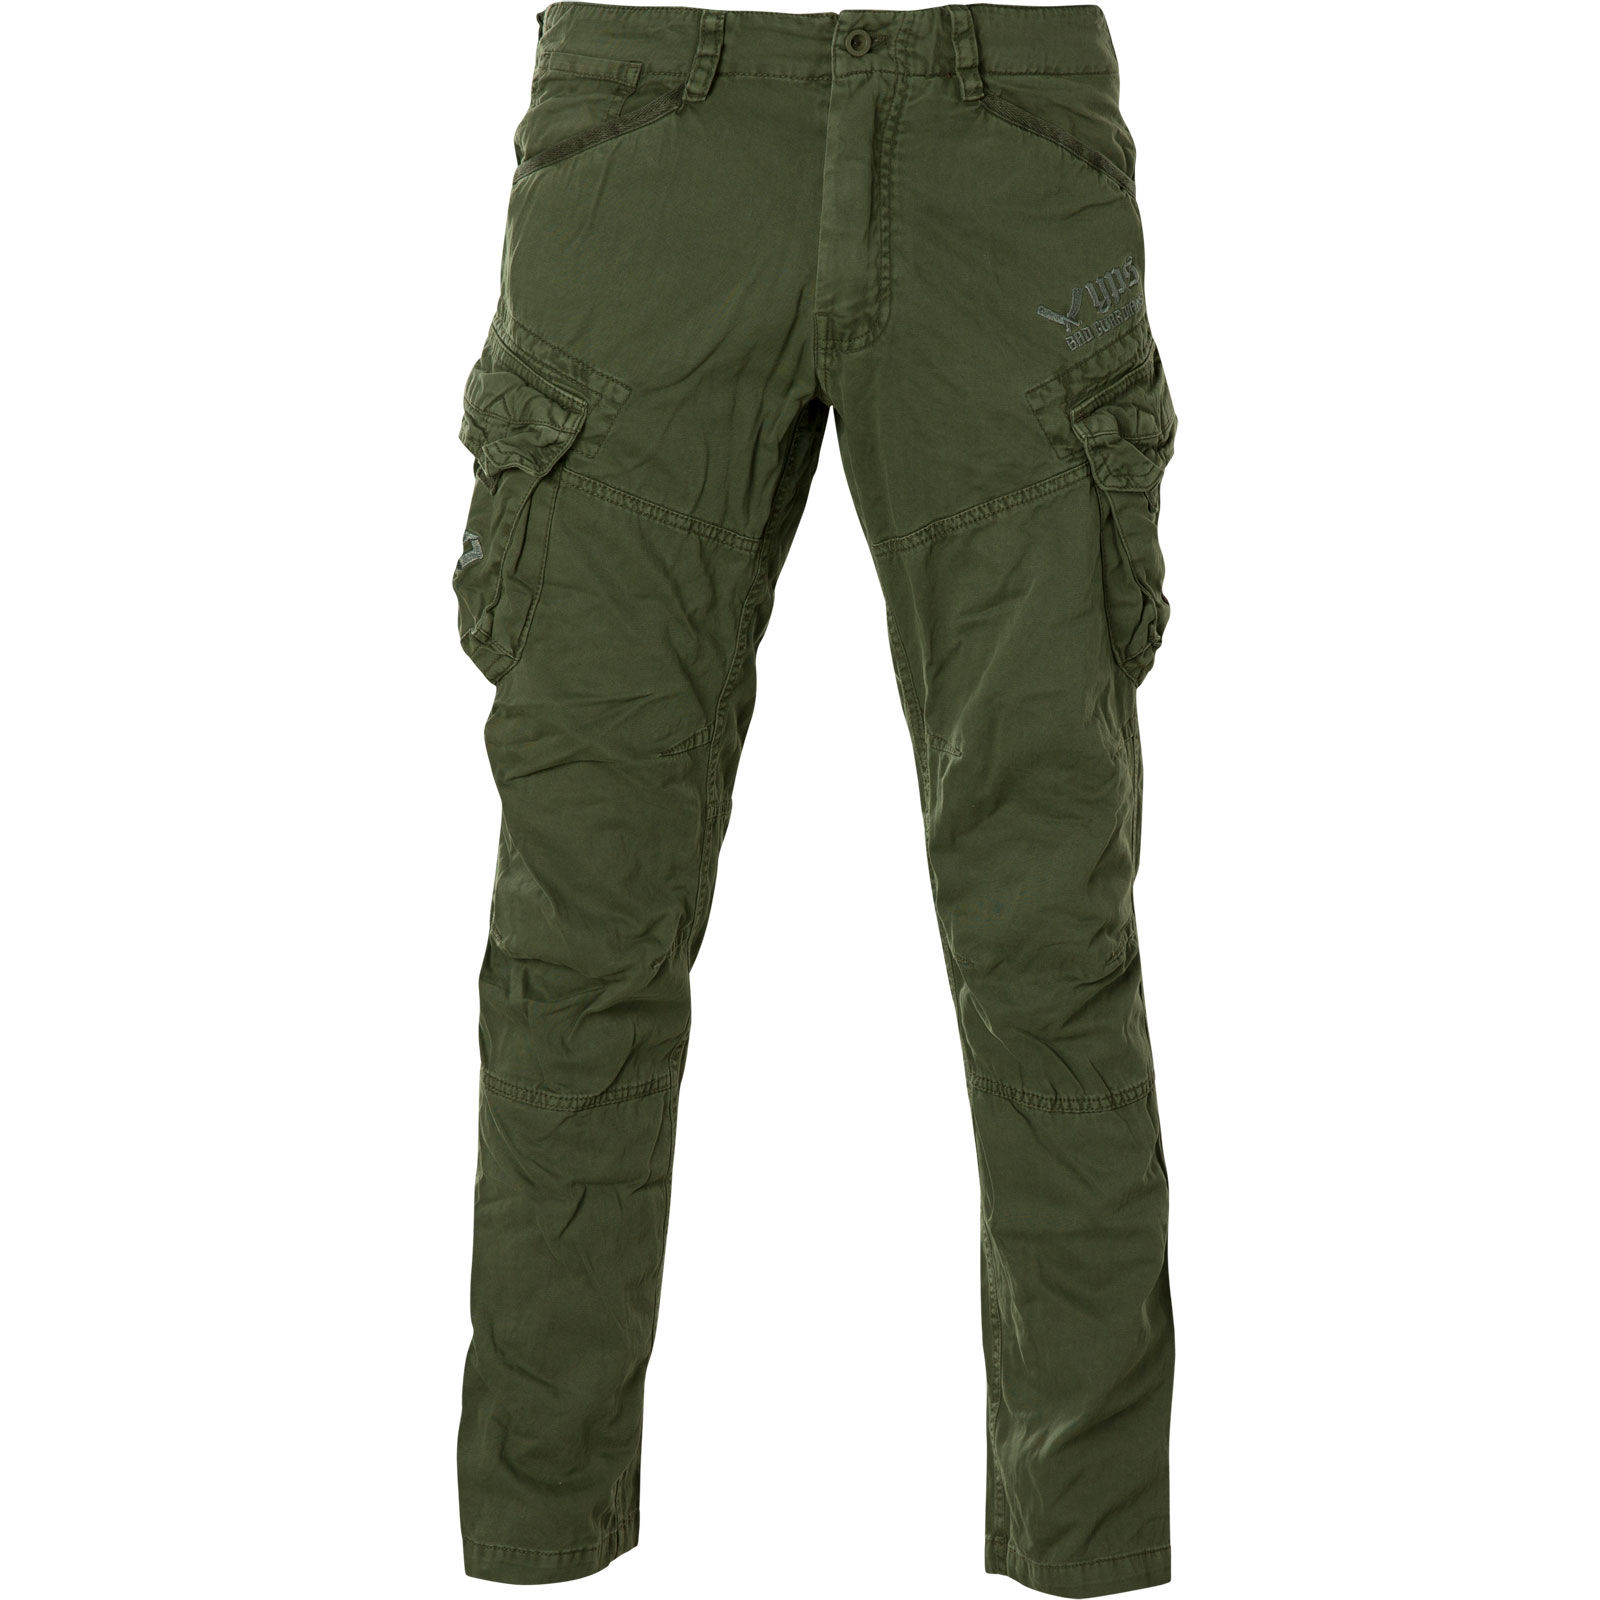 Yakuza Premium Cargo Pants YPCP-2666 with embroidery and patch